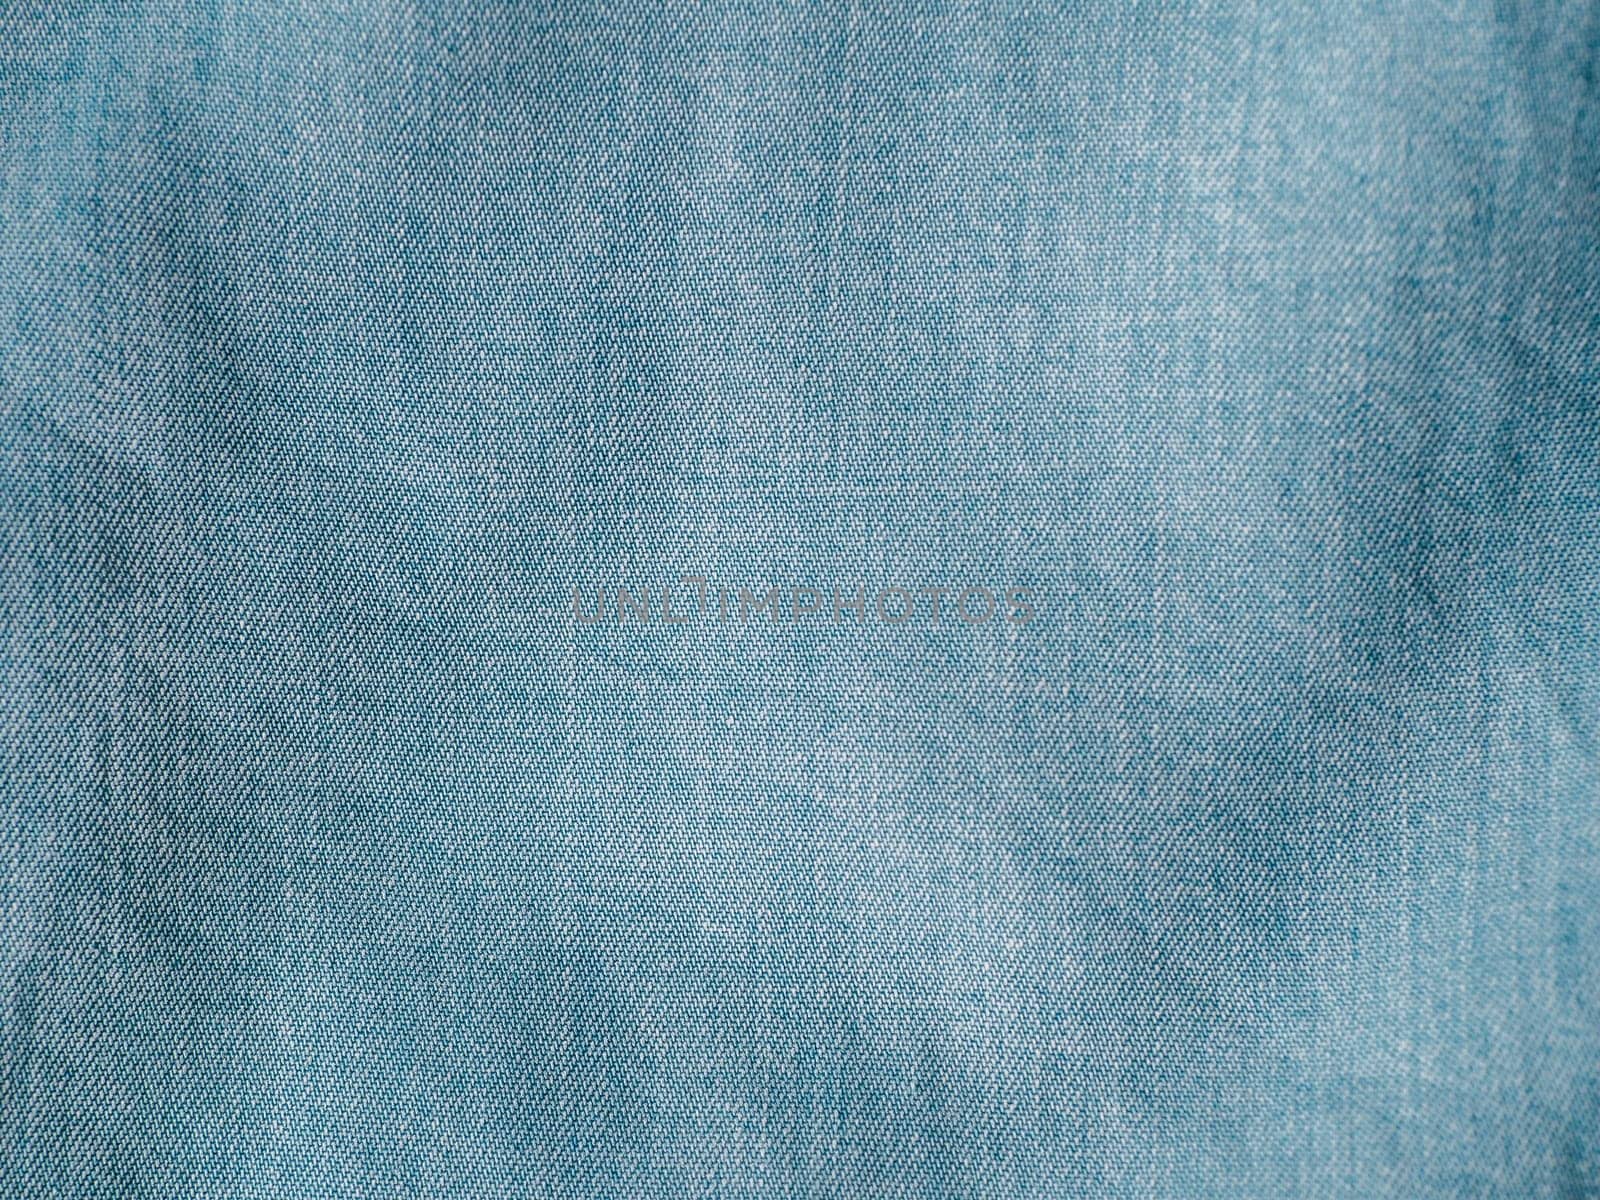 Modern soft jeans blouse texture close up. Lyocell or tencel pattern - modern natural cellulose fabric blue denim color. Can use for design or text. Copy space